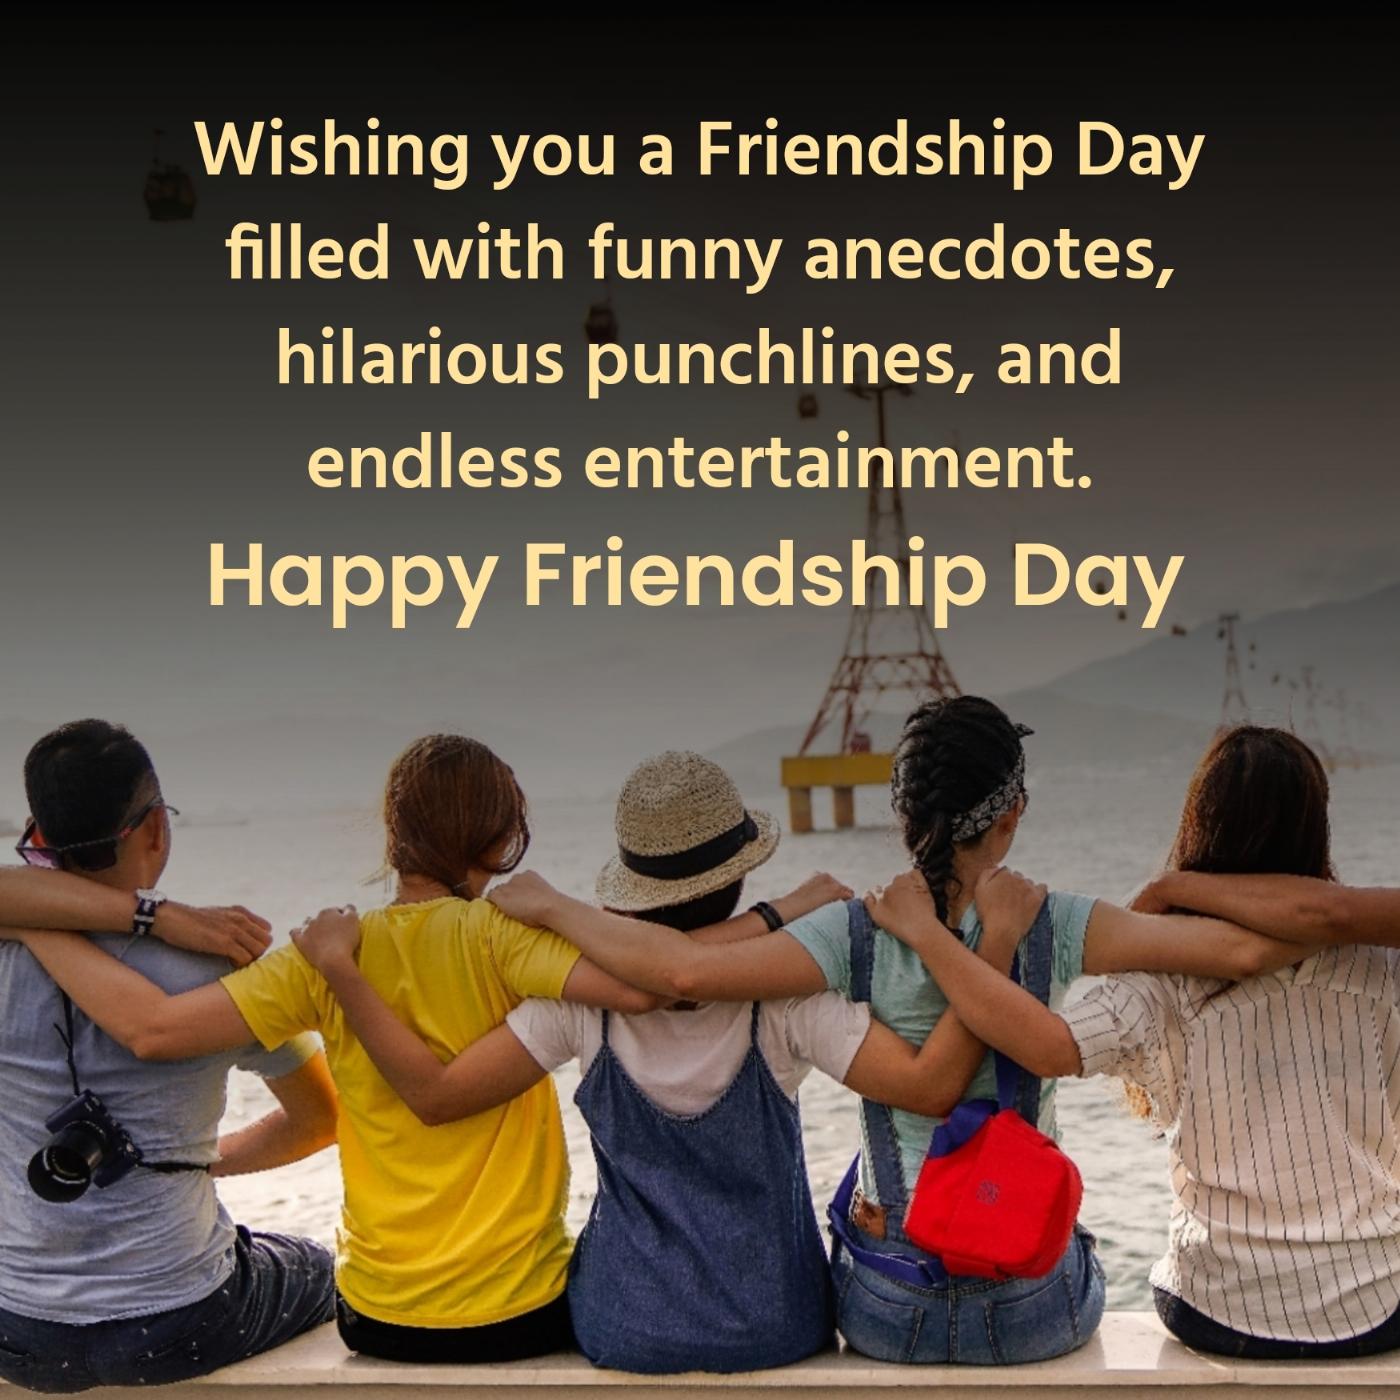 Wishing you a Friendship Day filled with funny anecdotes hilarious punchlines